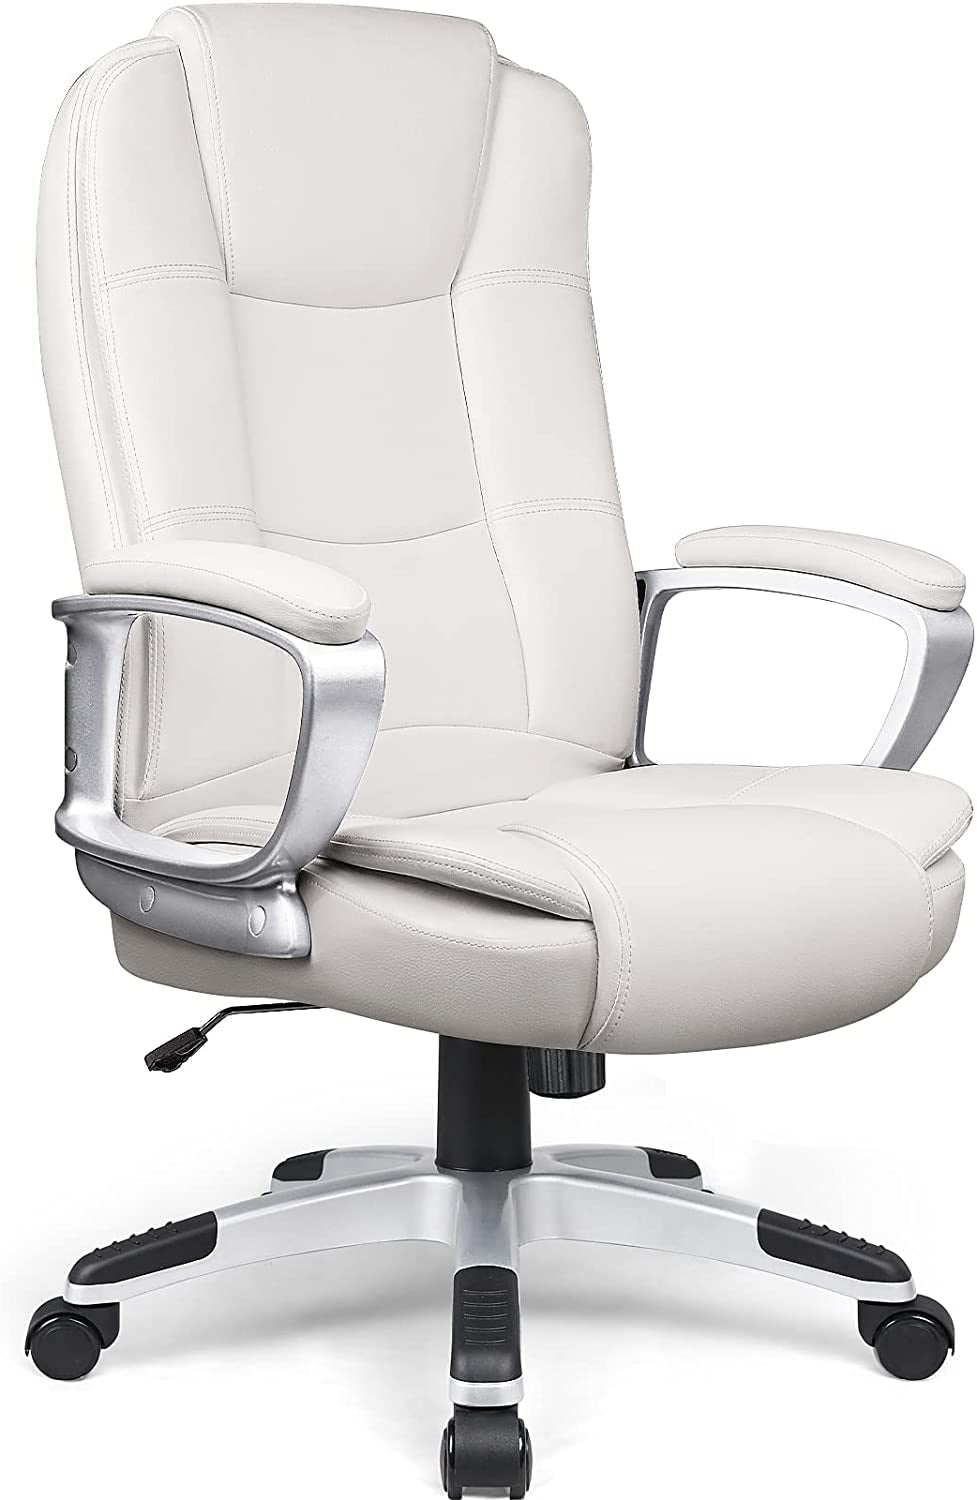 Office Desk Chair, Big and Tall Managerial Executive Chair, High Back Computer Chair, Ergonomic Adjustable Height PU Leather Chairs with Cushions Armrest for Long Time Sitting (White)